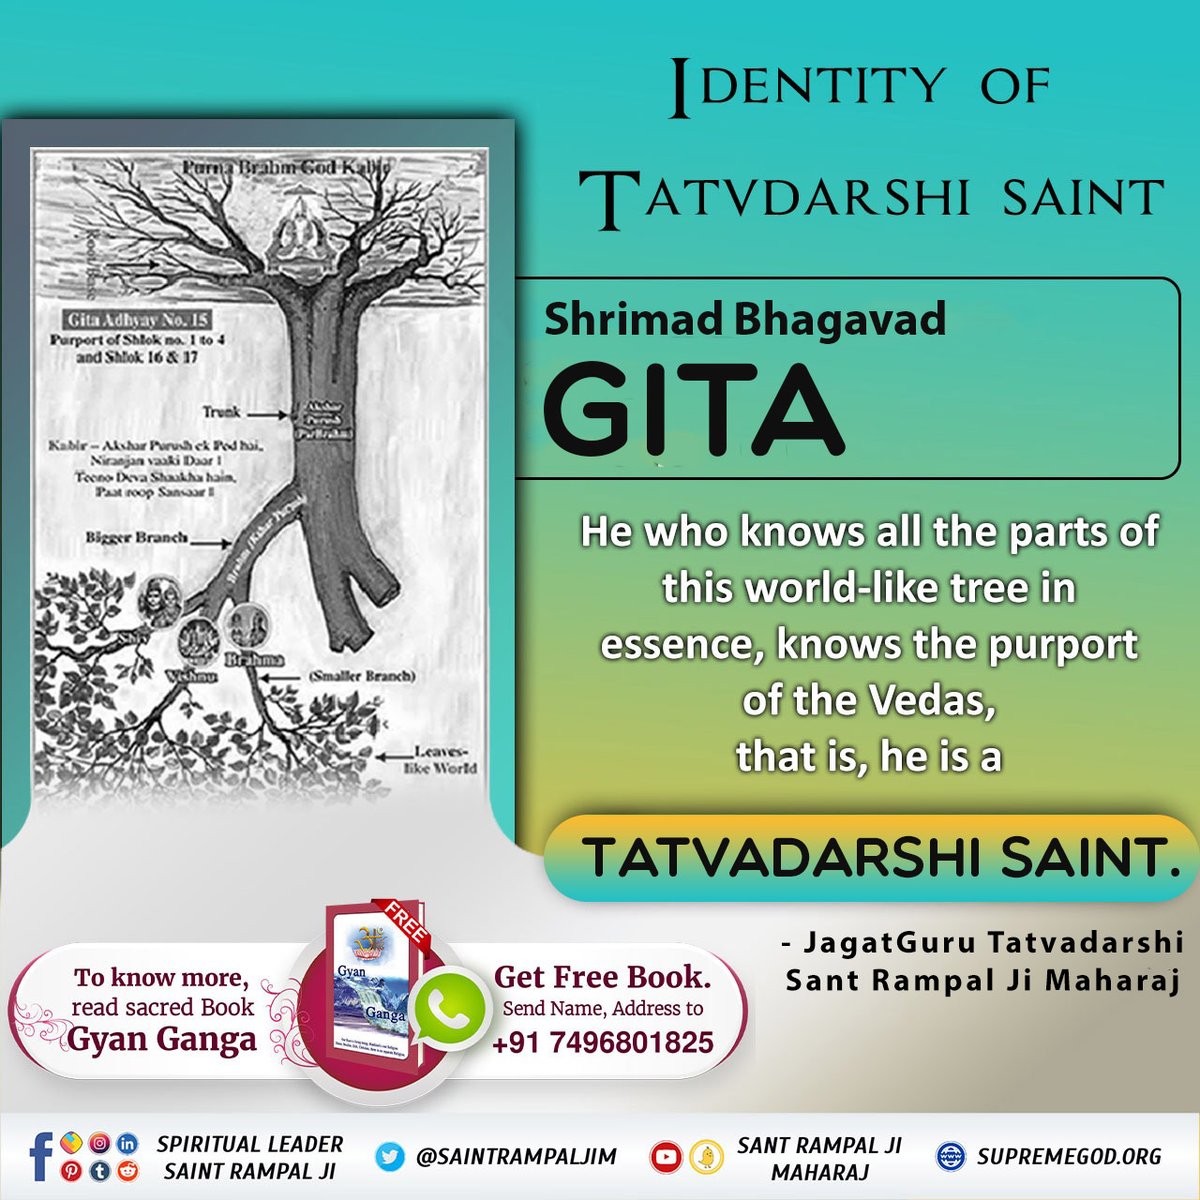 #गीता_प्रभुदत्त_ज्ञान_है Identity of a Tatvadarshi Saint Shrimad Bhagavad #Gita Chapter 15:1 He who knows all the parts of this world-like tree in essence, knows the purport of the Vedas, that is, he is a Tatvdarshi saint.